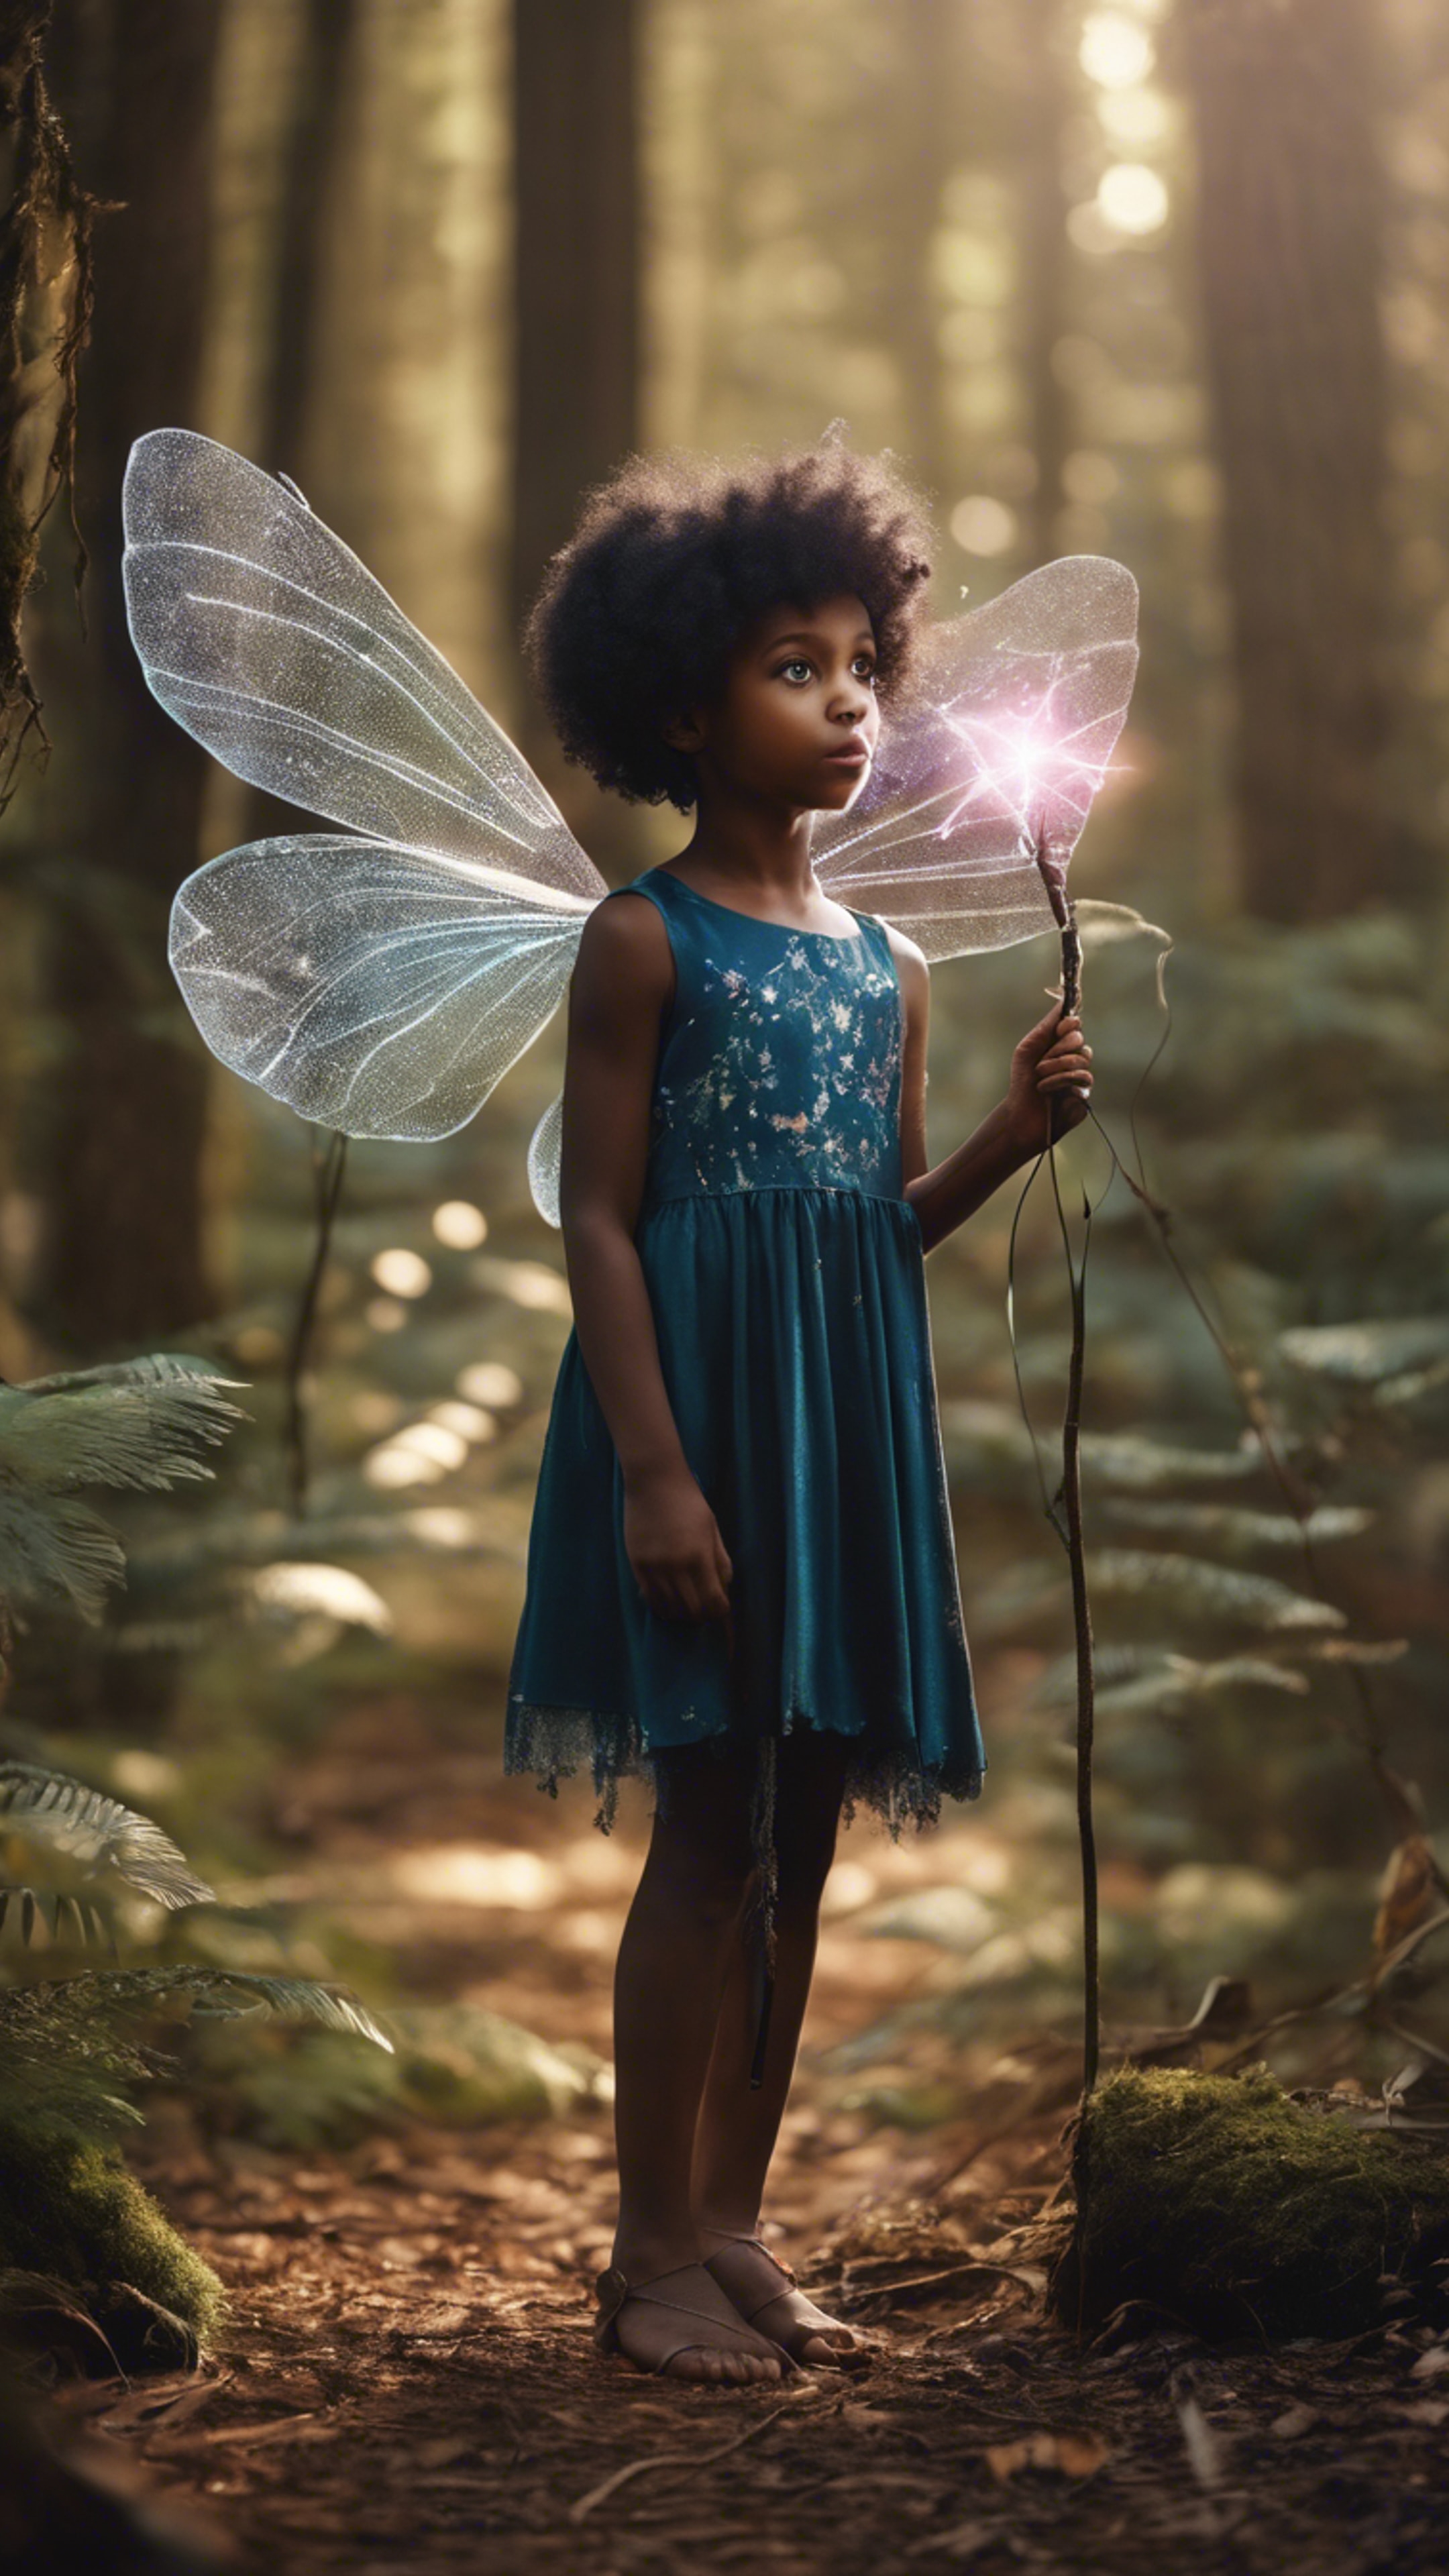 A cute image of a black girl wearing fairy wings, holding a magic wand in a mystical forest. Tapeta[6c77347a4892474c928d]